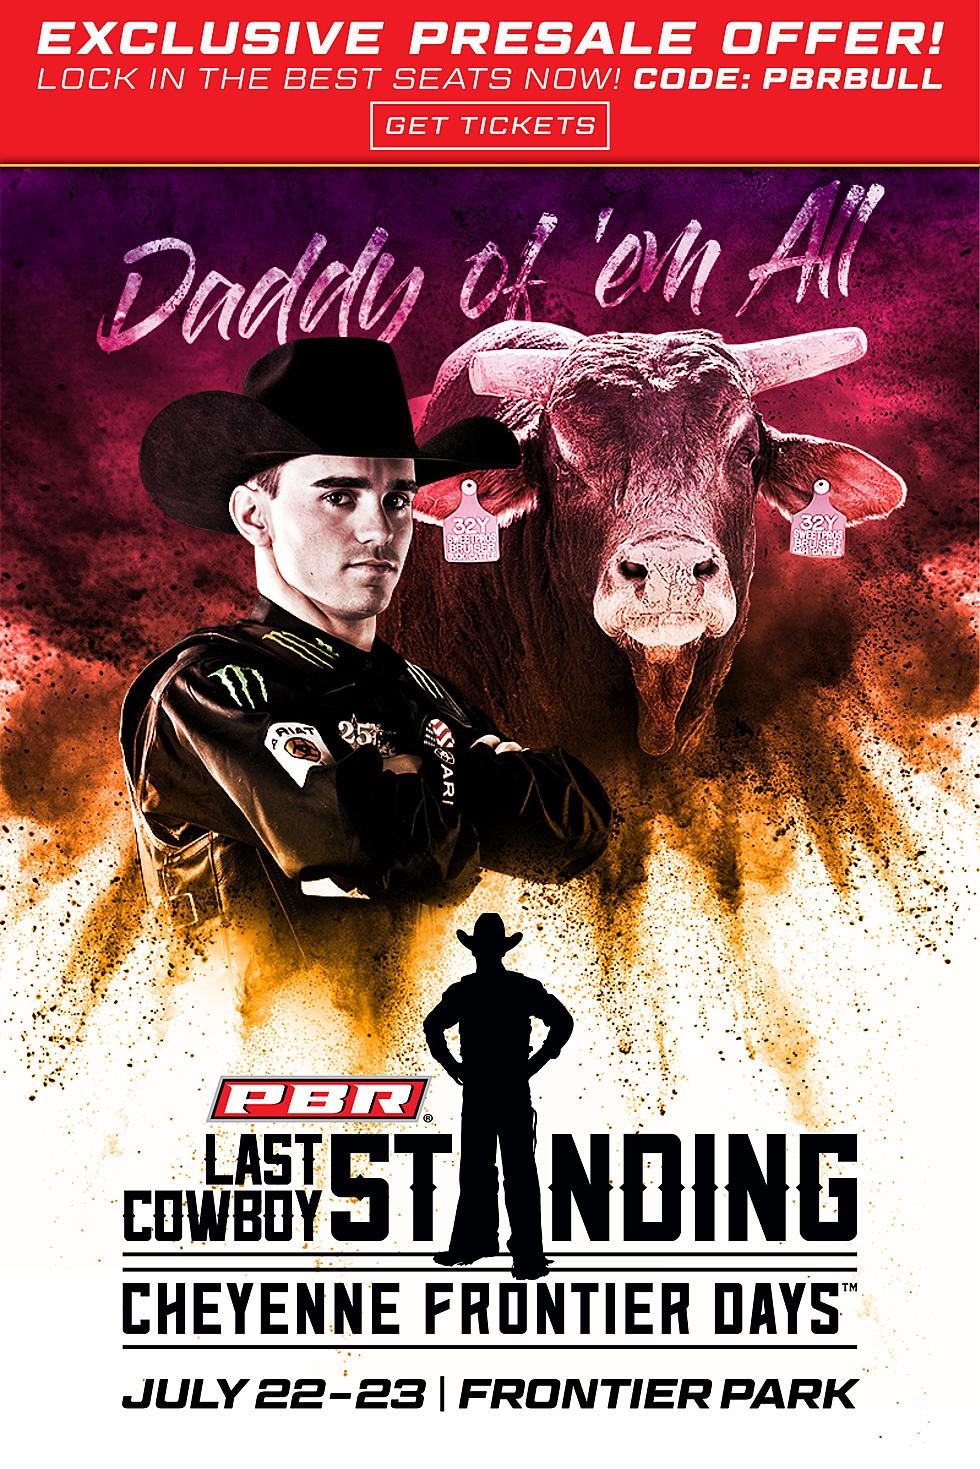 Here is Your ‘Last Cowboy Standing’ at CFD Presale Code